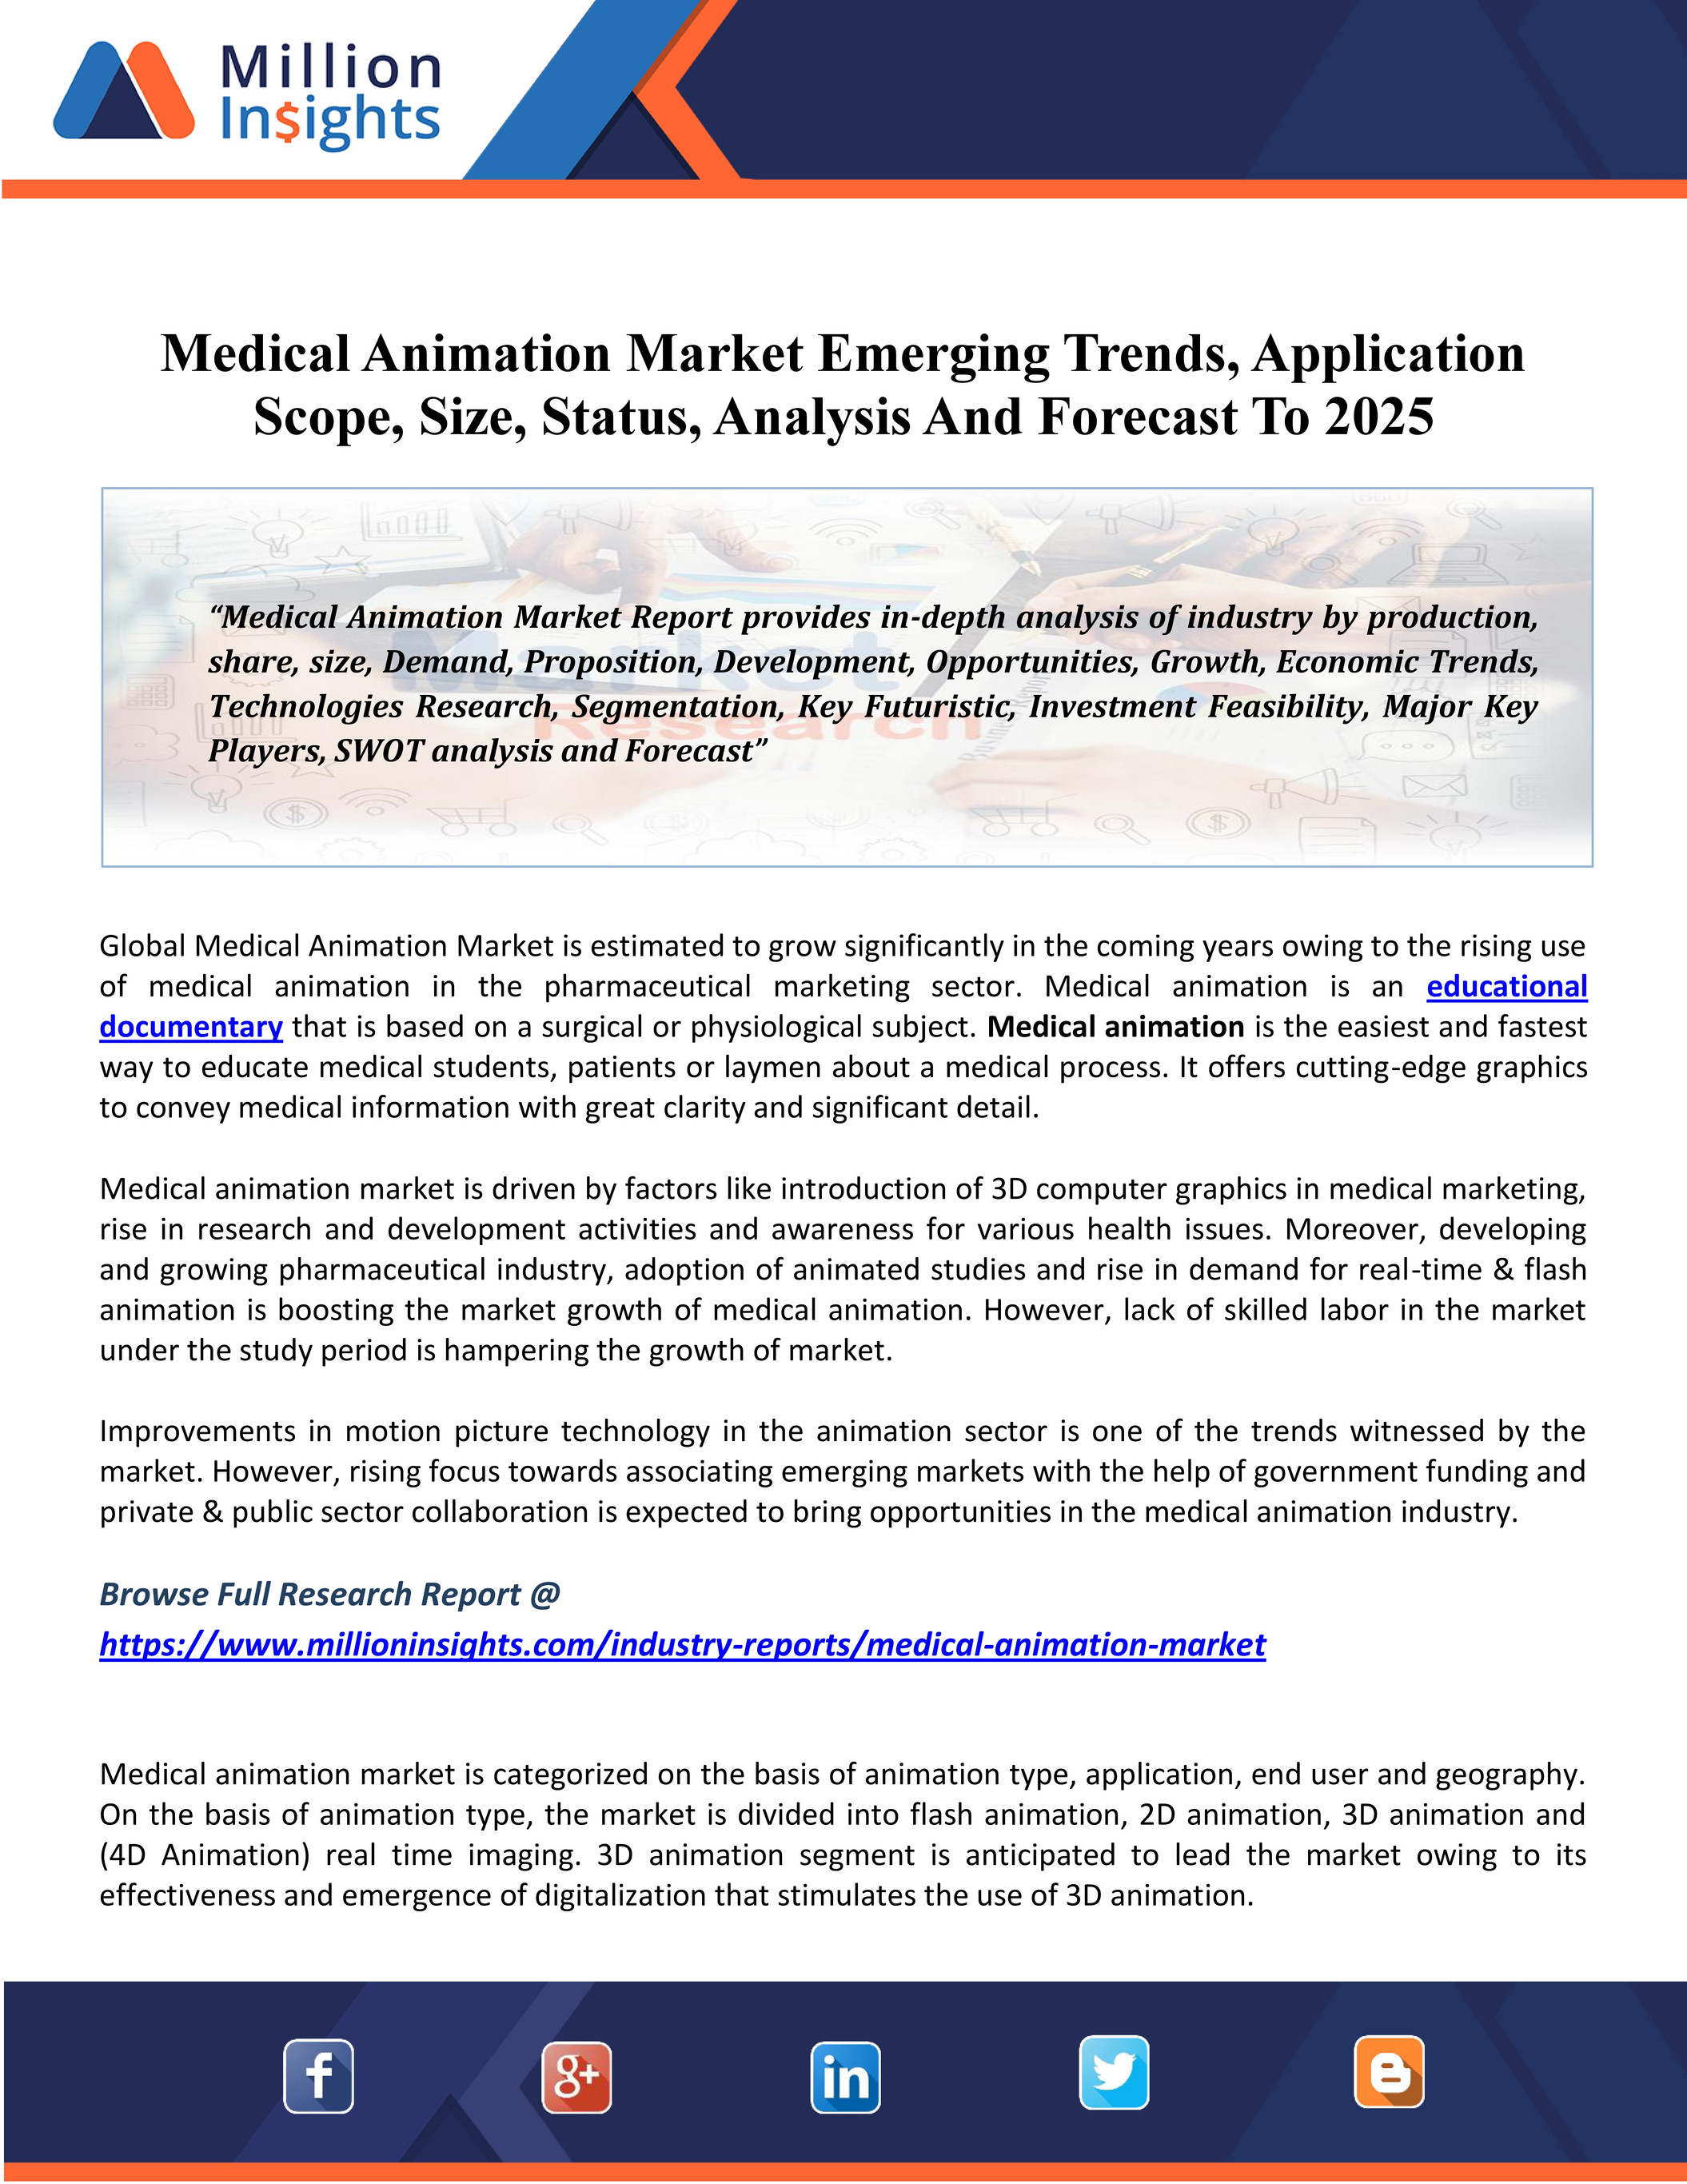 Market Hub - Medical Animation Market 2020 Industry Research, Share, Trend,  Global Industry Size, Price, Future Analysis, Regional Outlook To 2025 -  Page 1 - Created with 